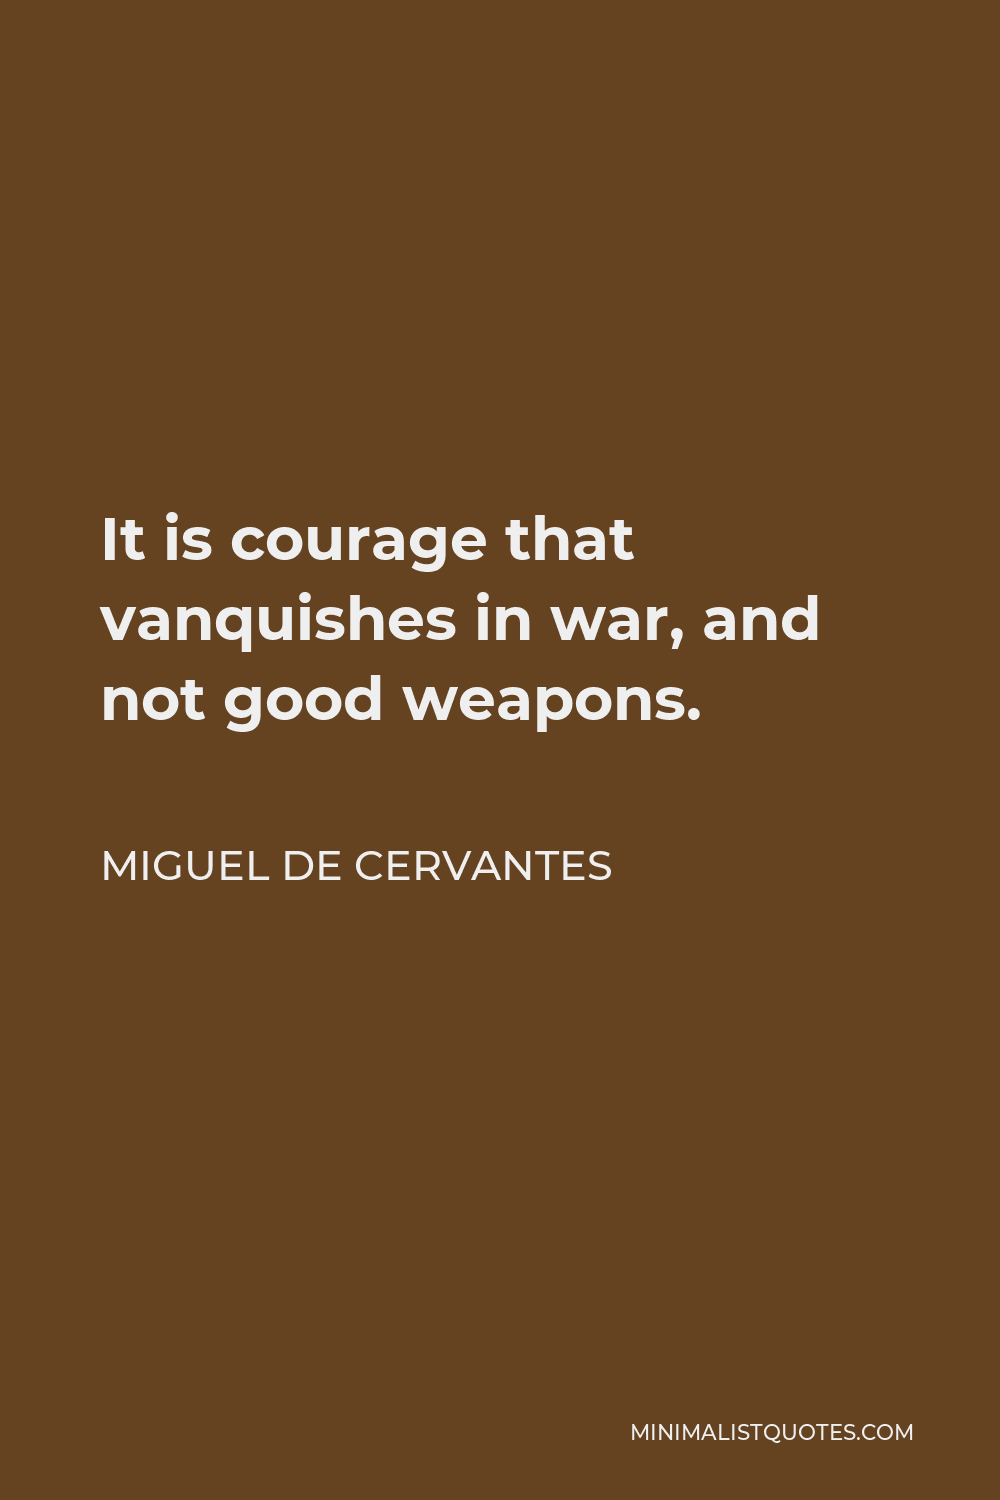 Miguel de Cervantes Quote - It is courage that vanquishes in war, and not good weapons.